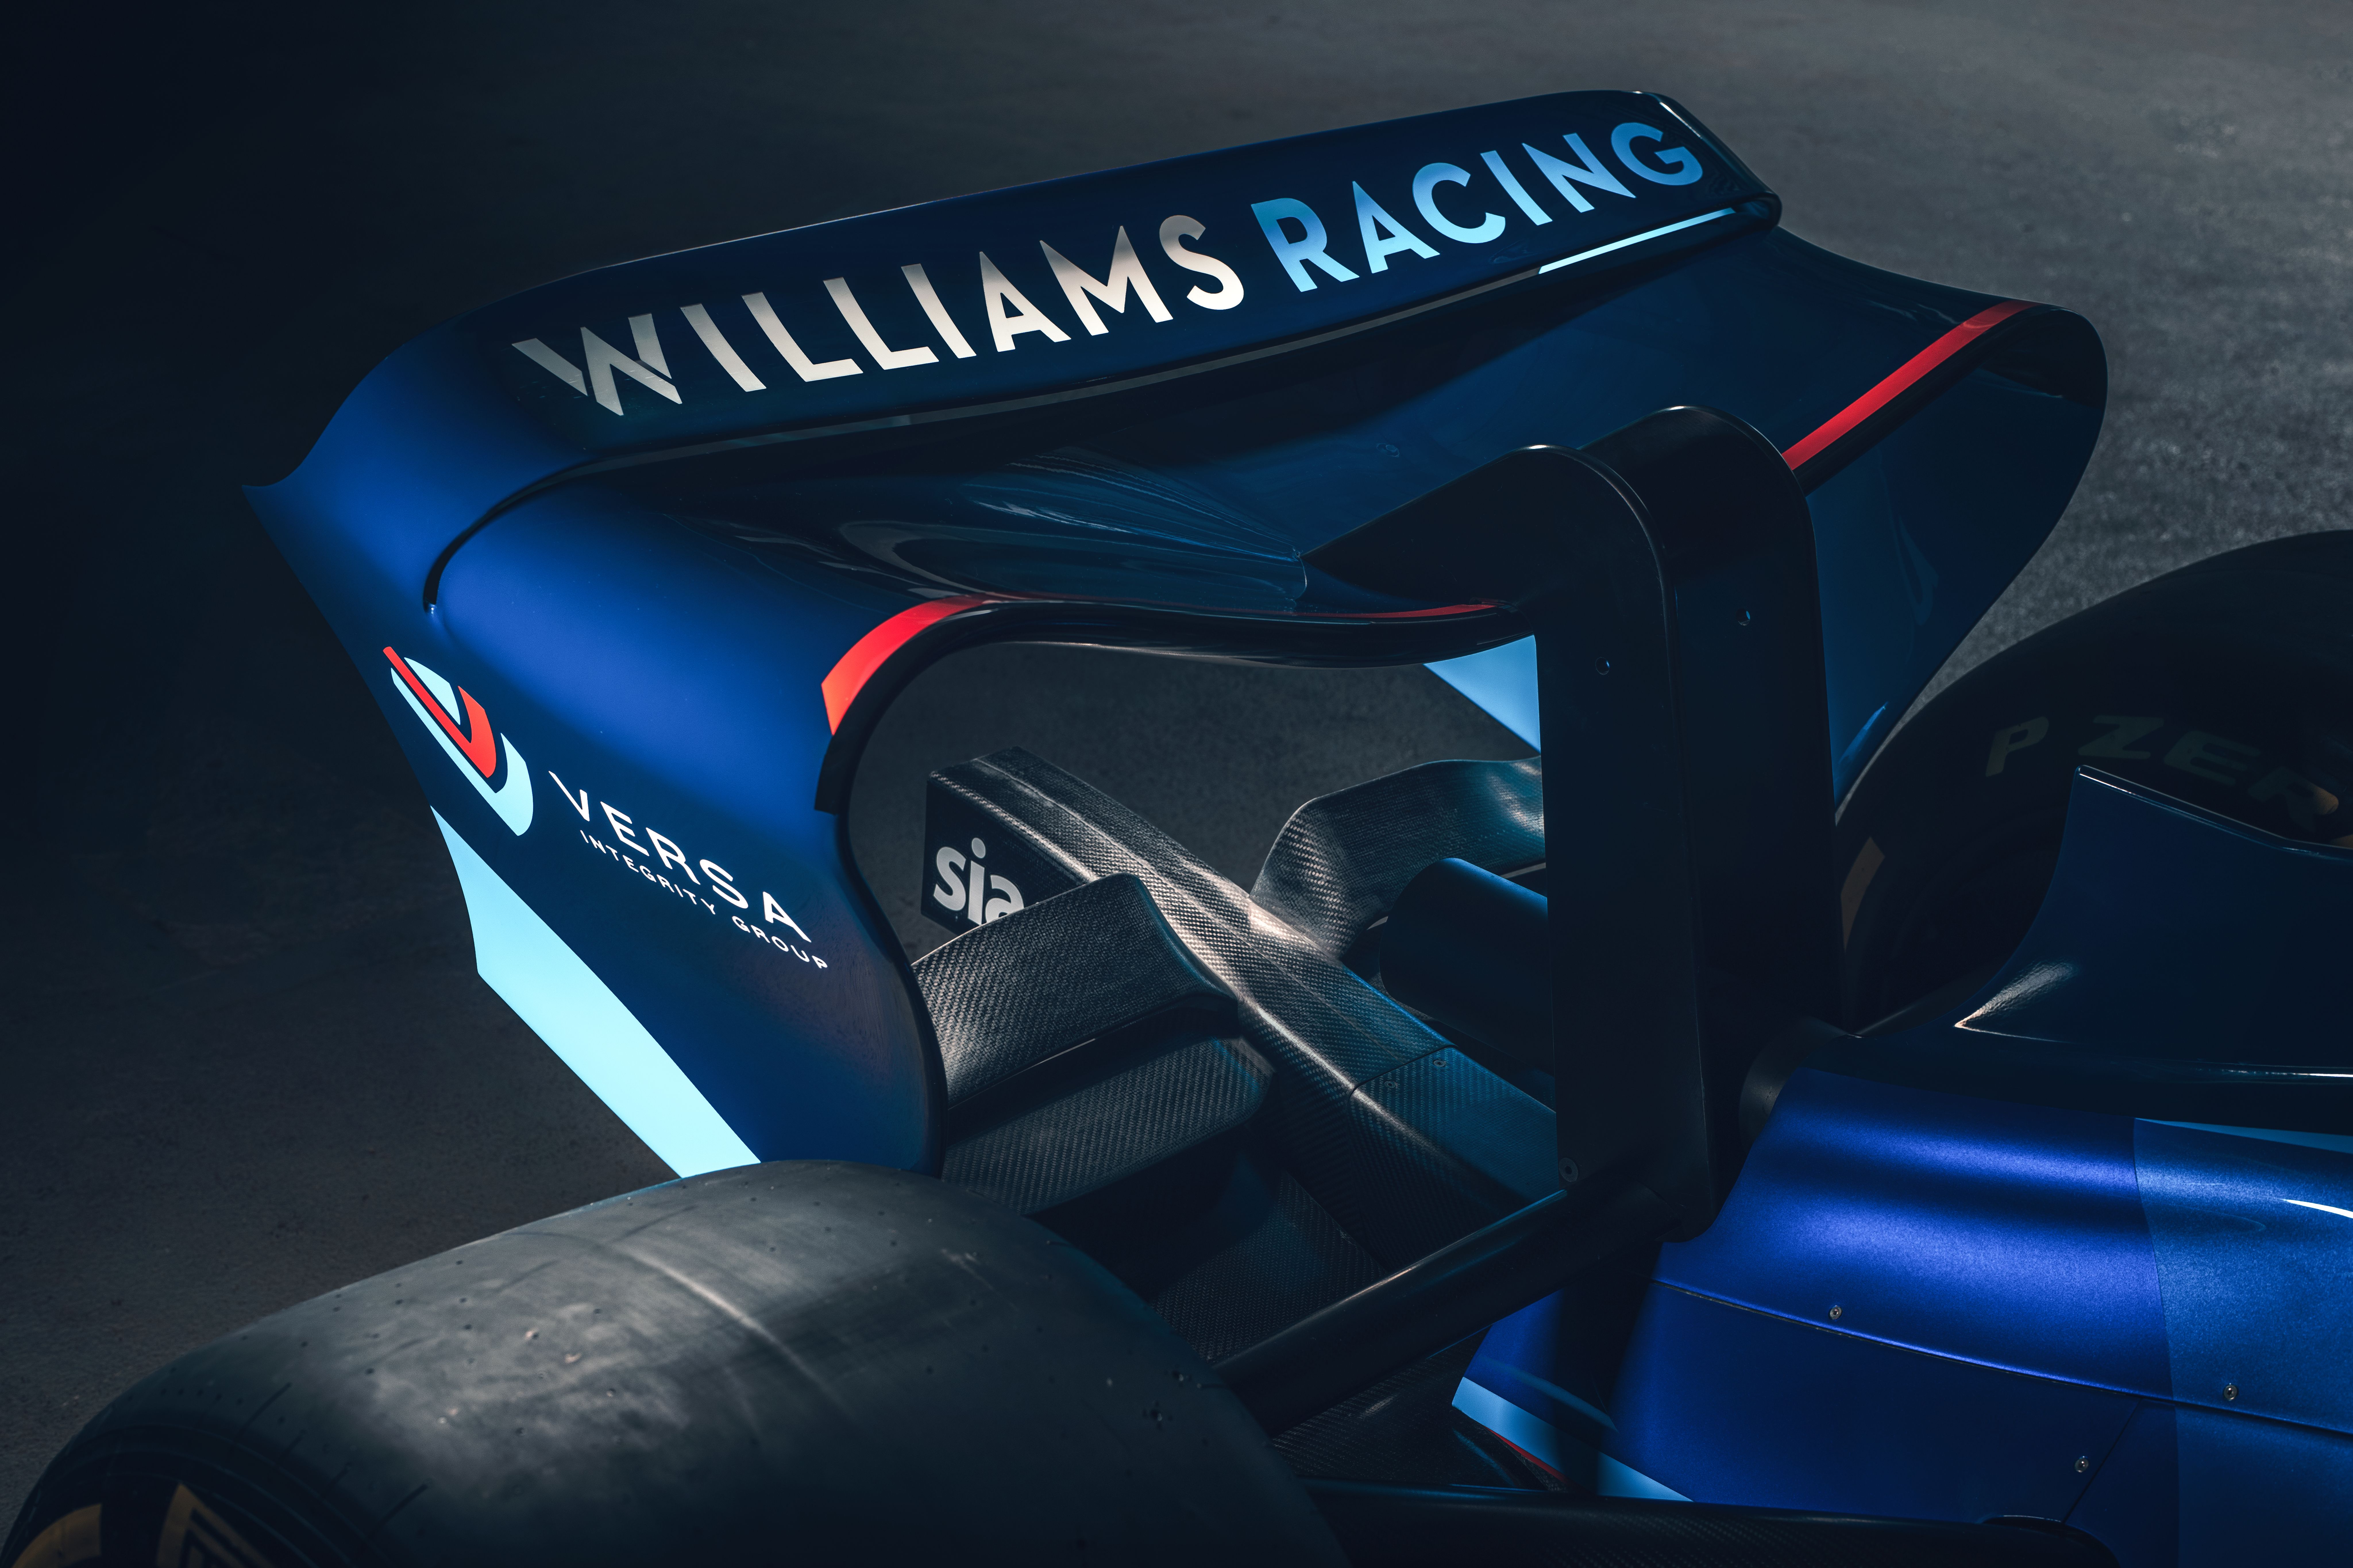 First look: The 2022 Williams Racing livery in photo